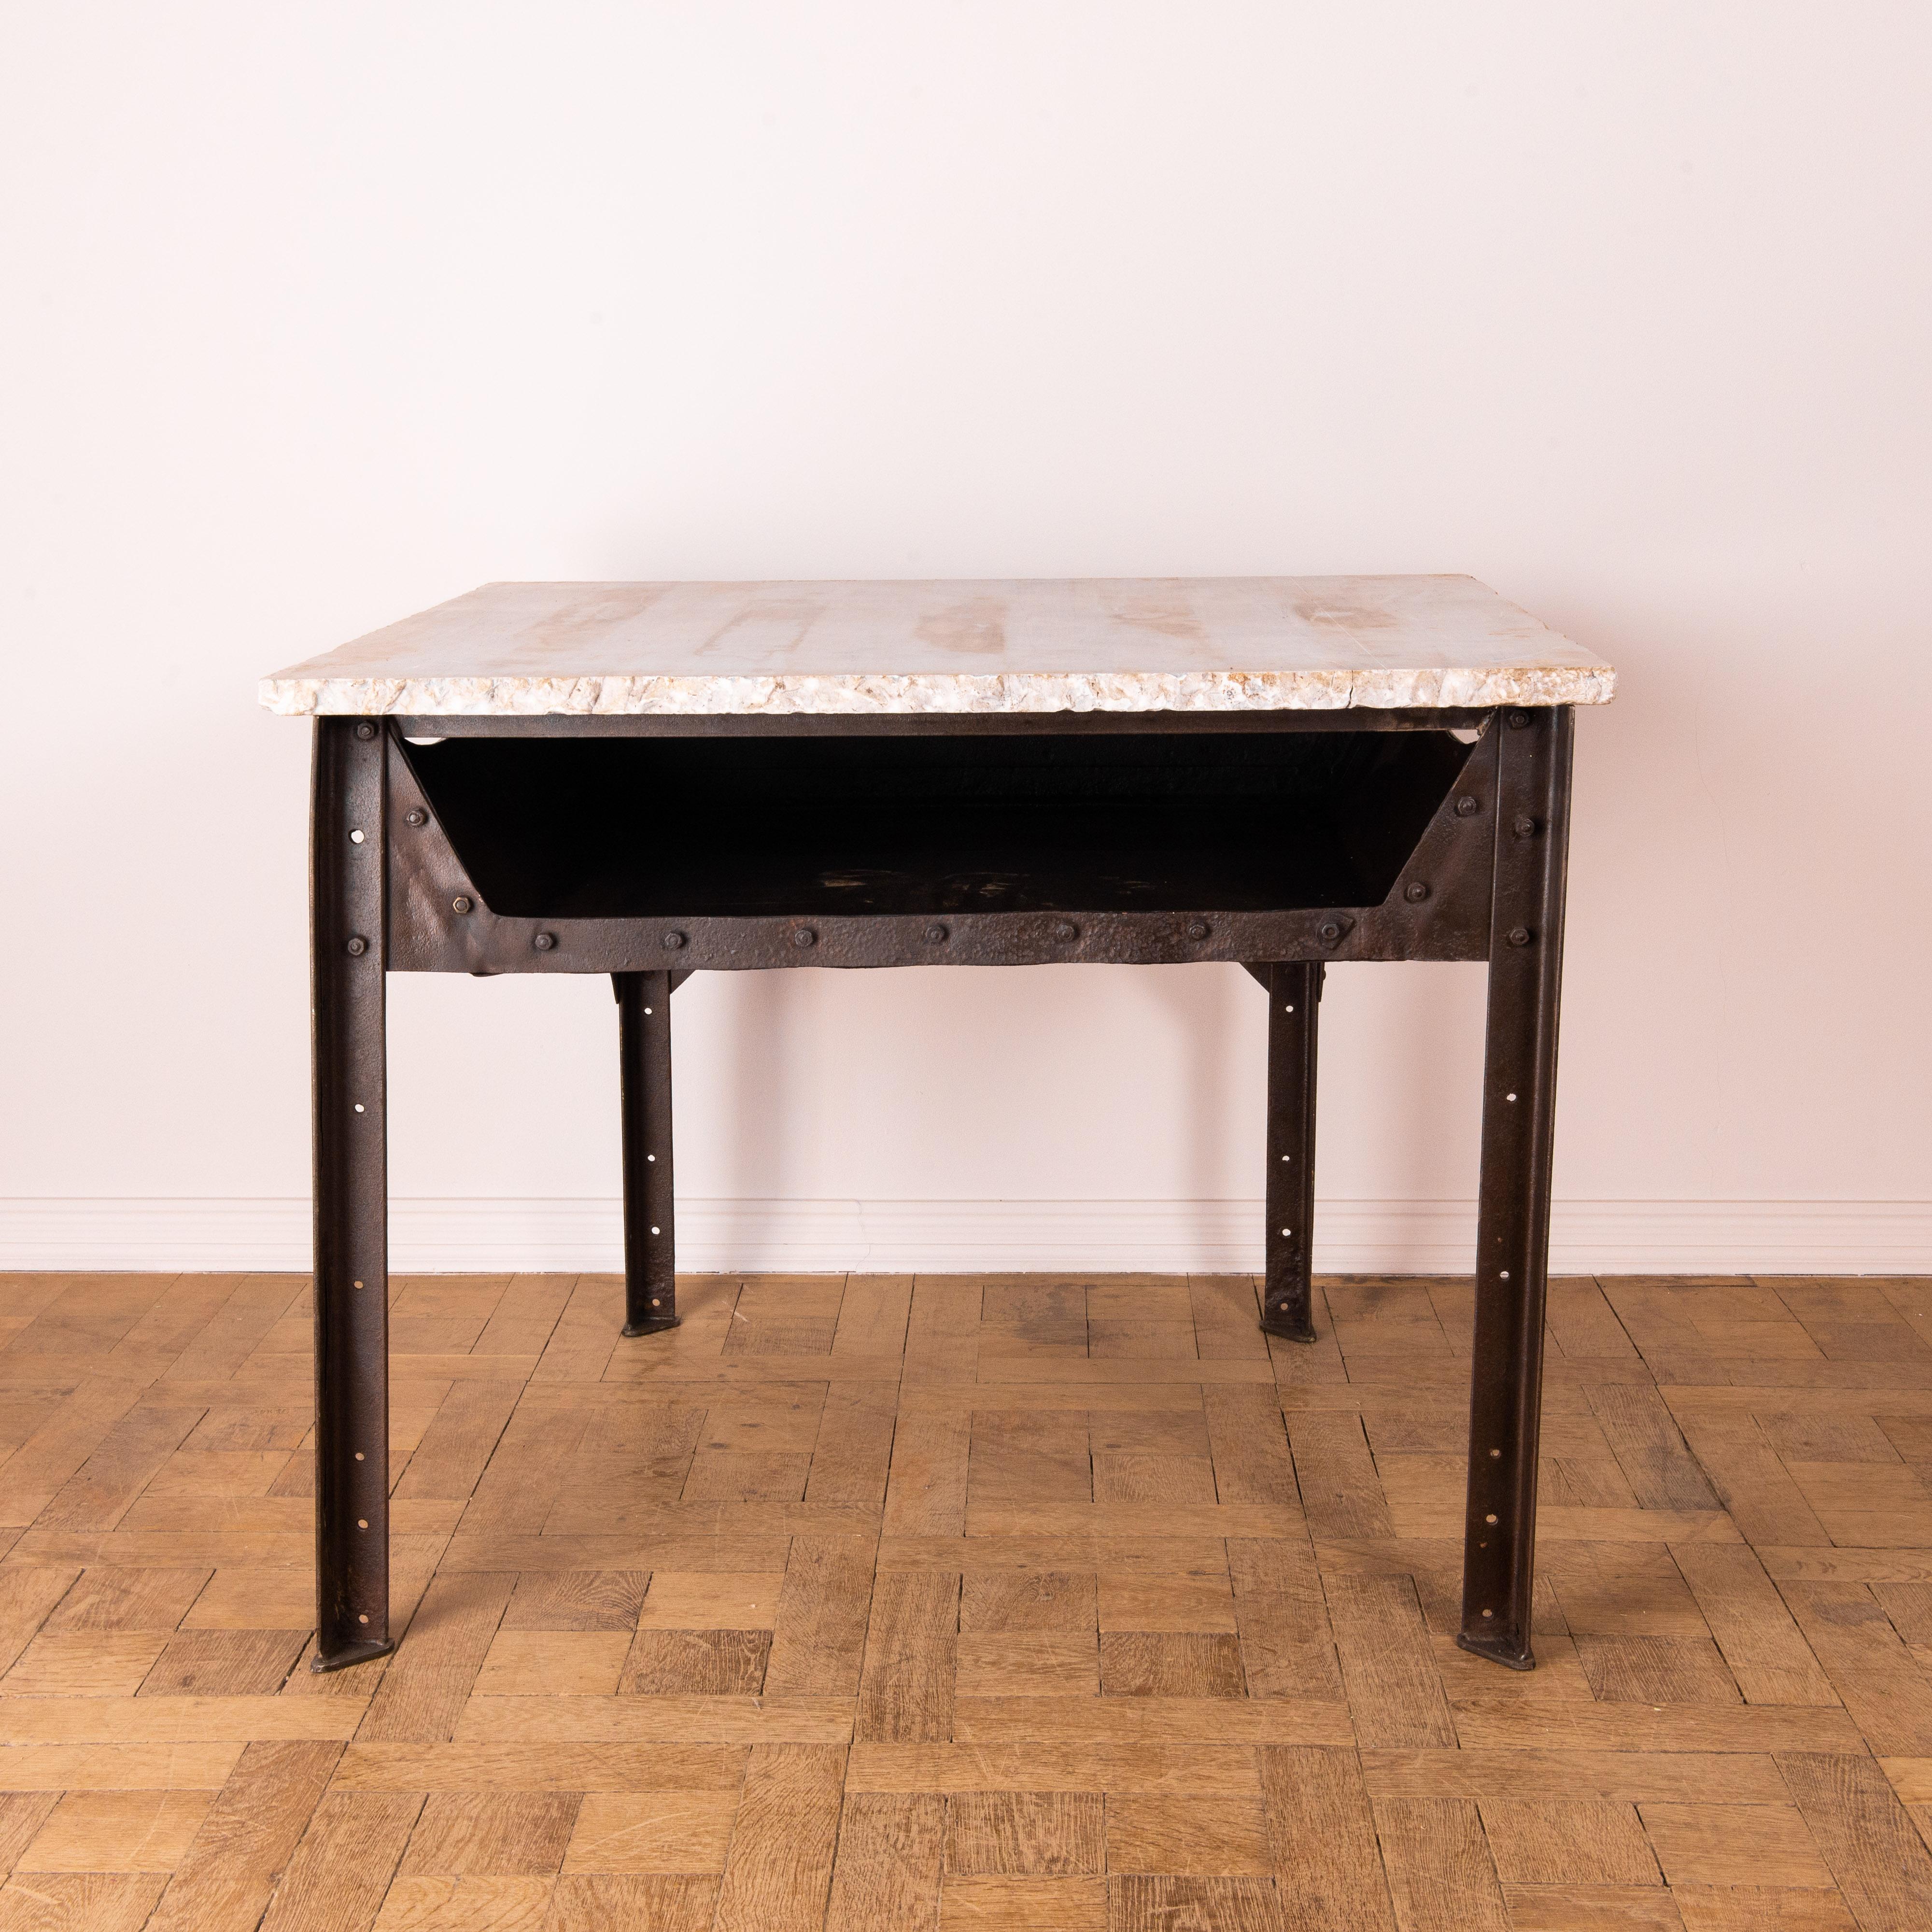 Czech Industrial Riveted Steel Table with Marble Top